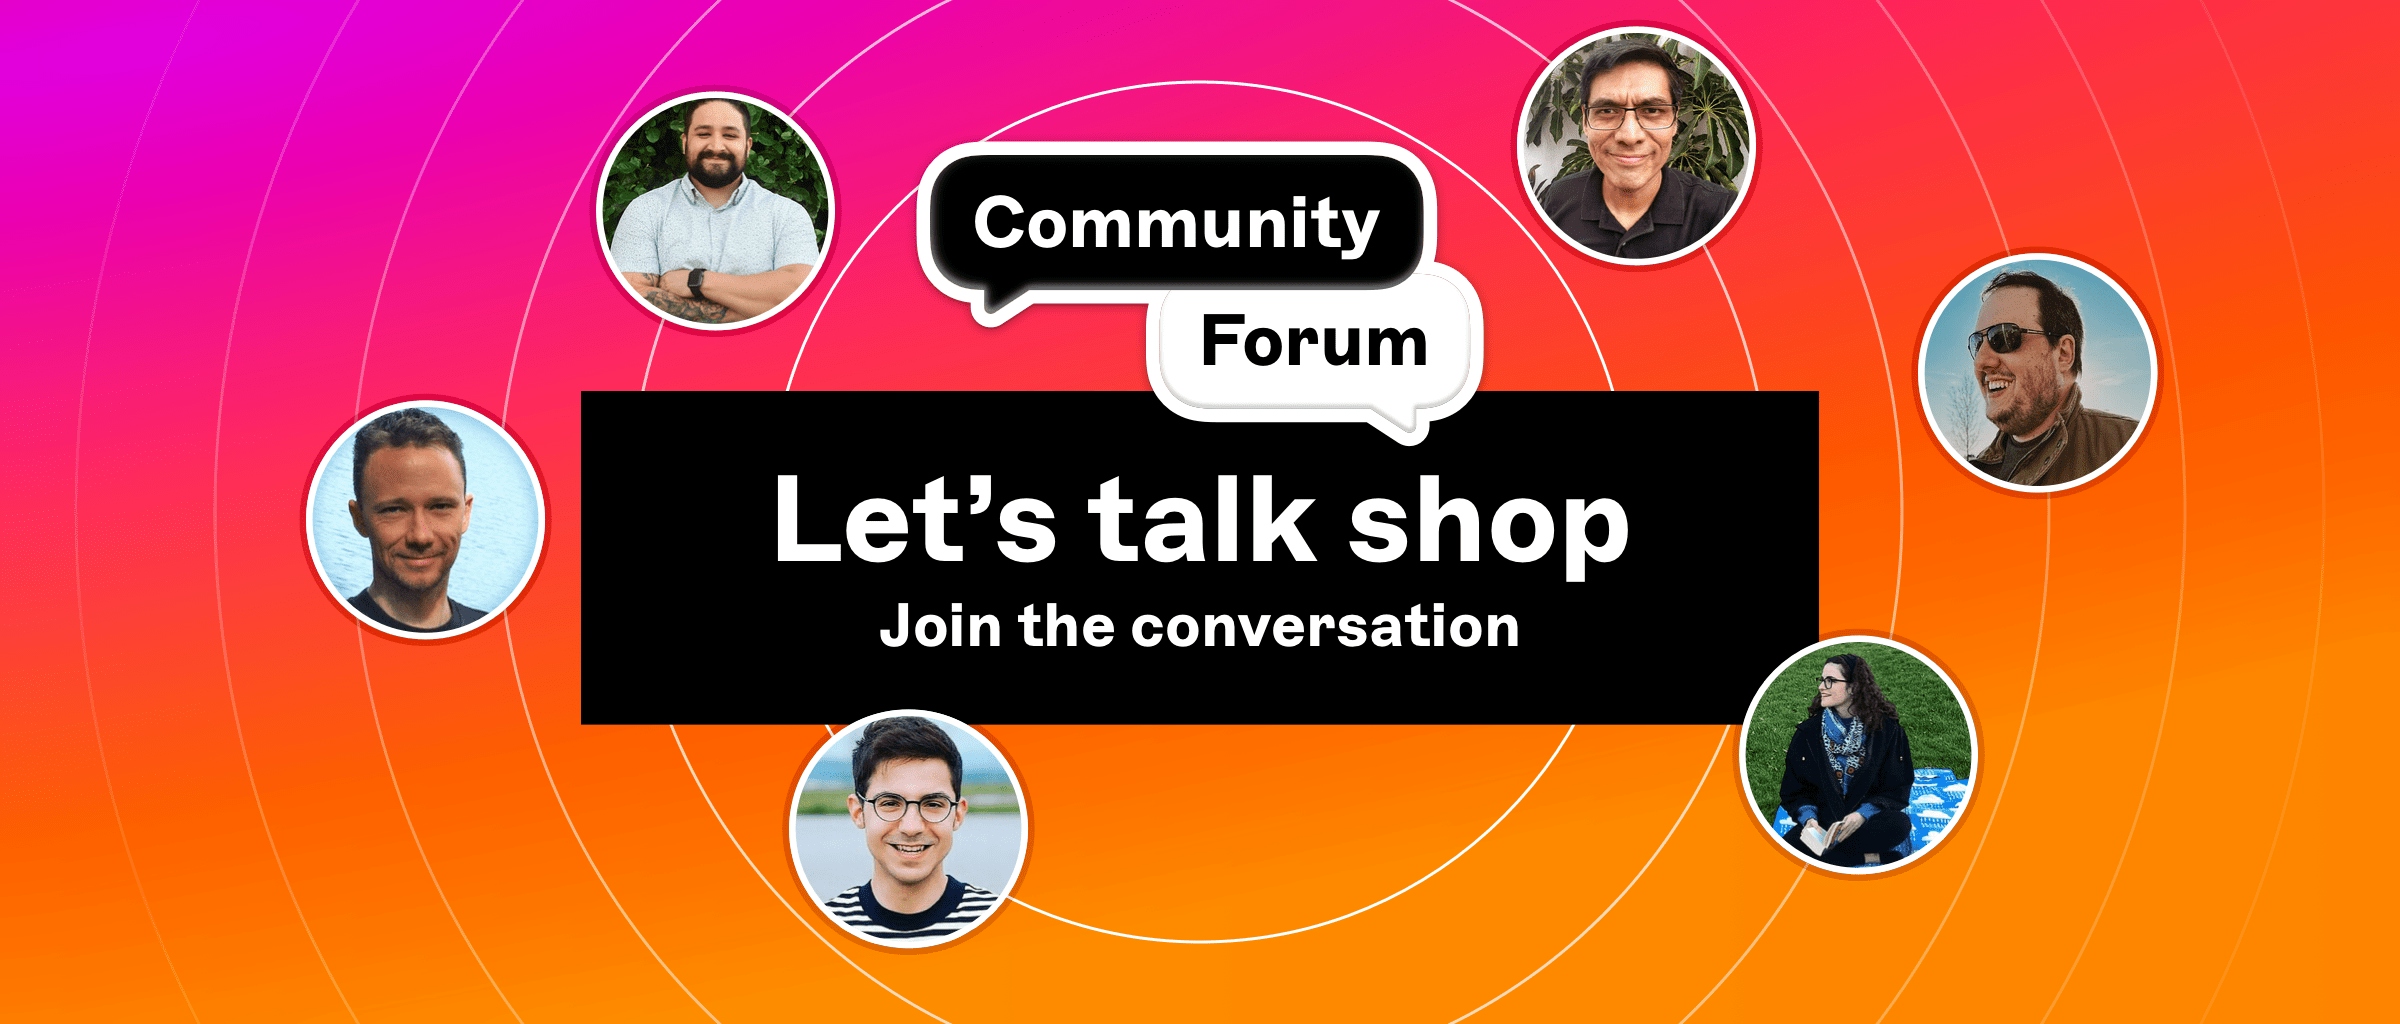 image made in sketch of community forum